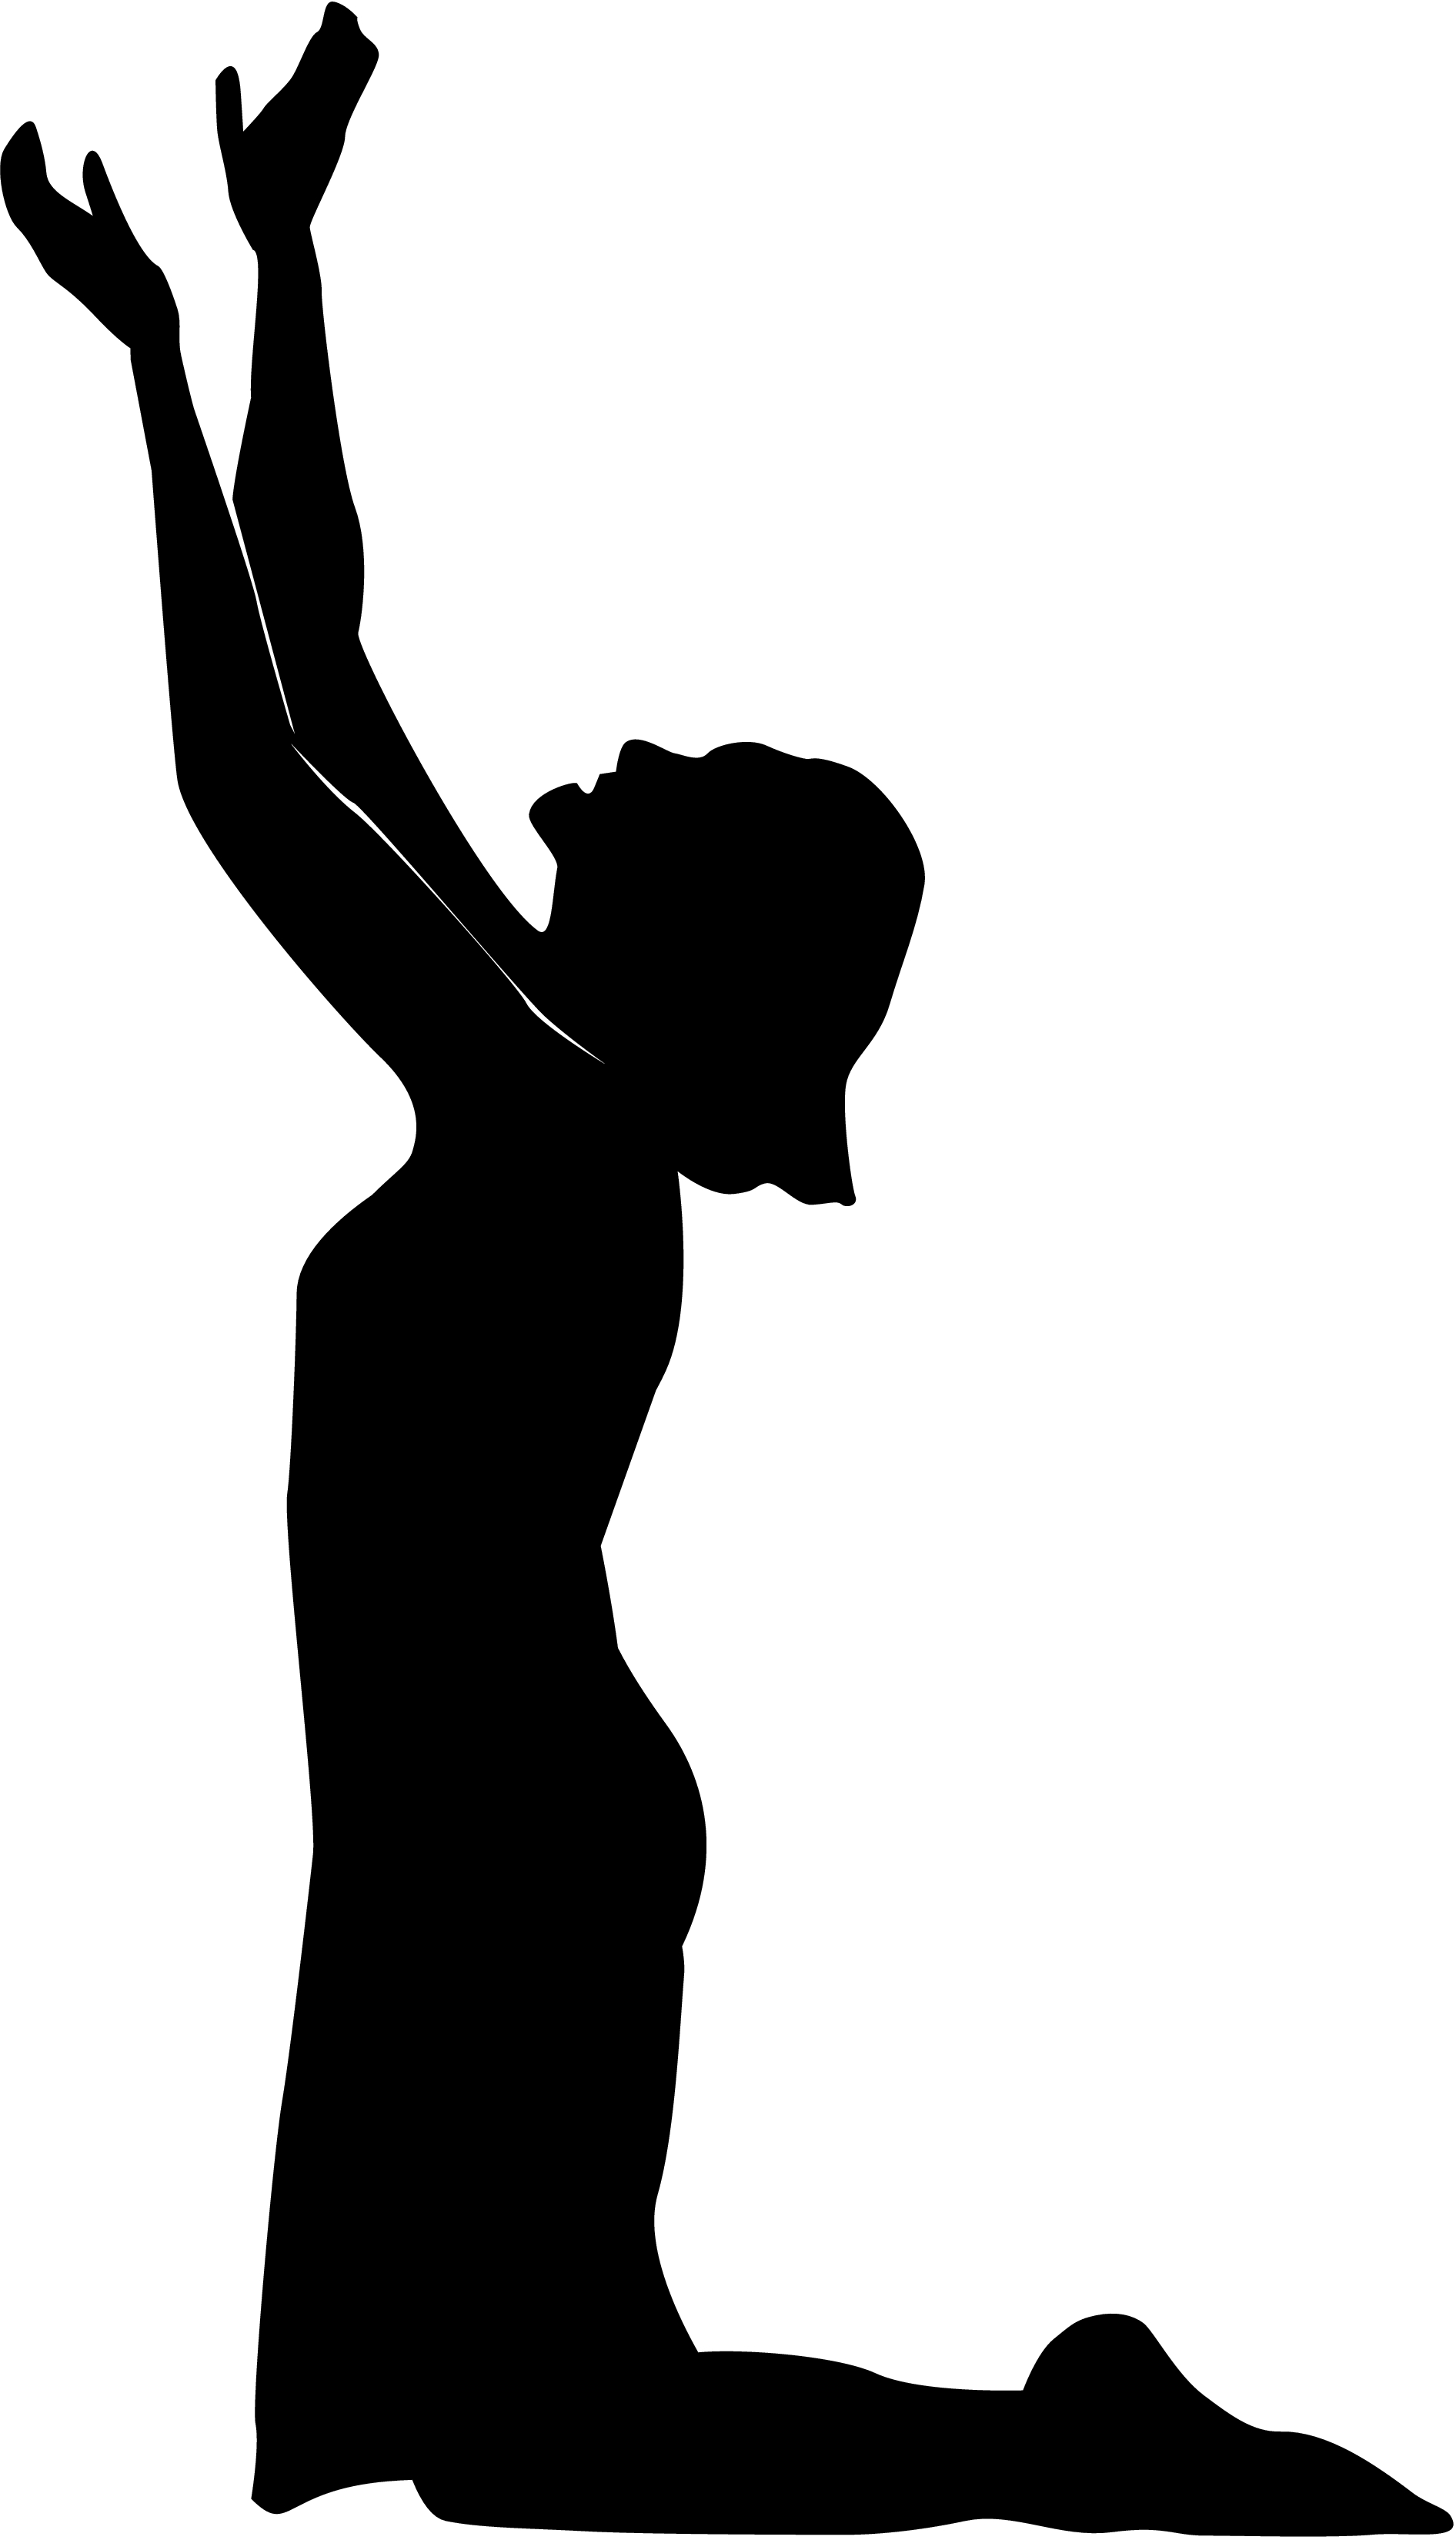 Praying hands silhouette clipart